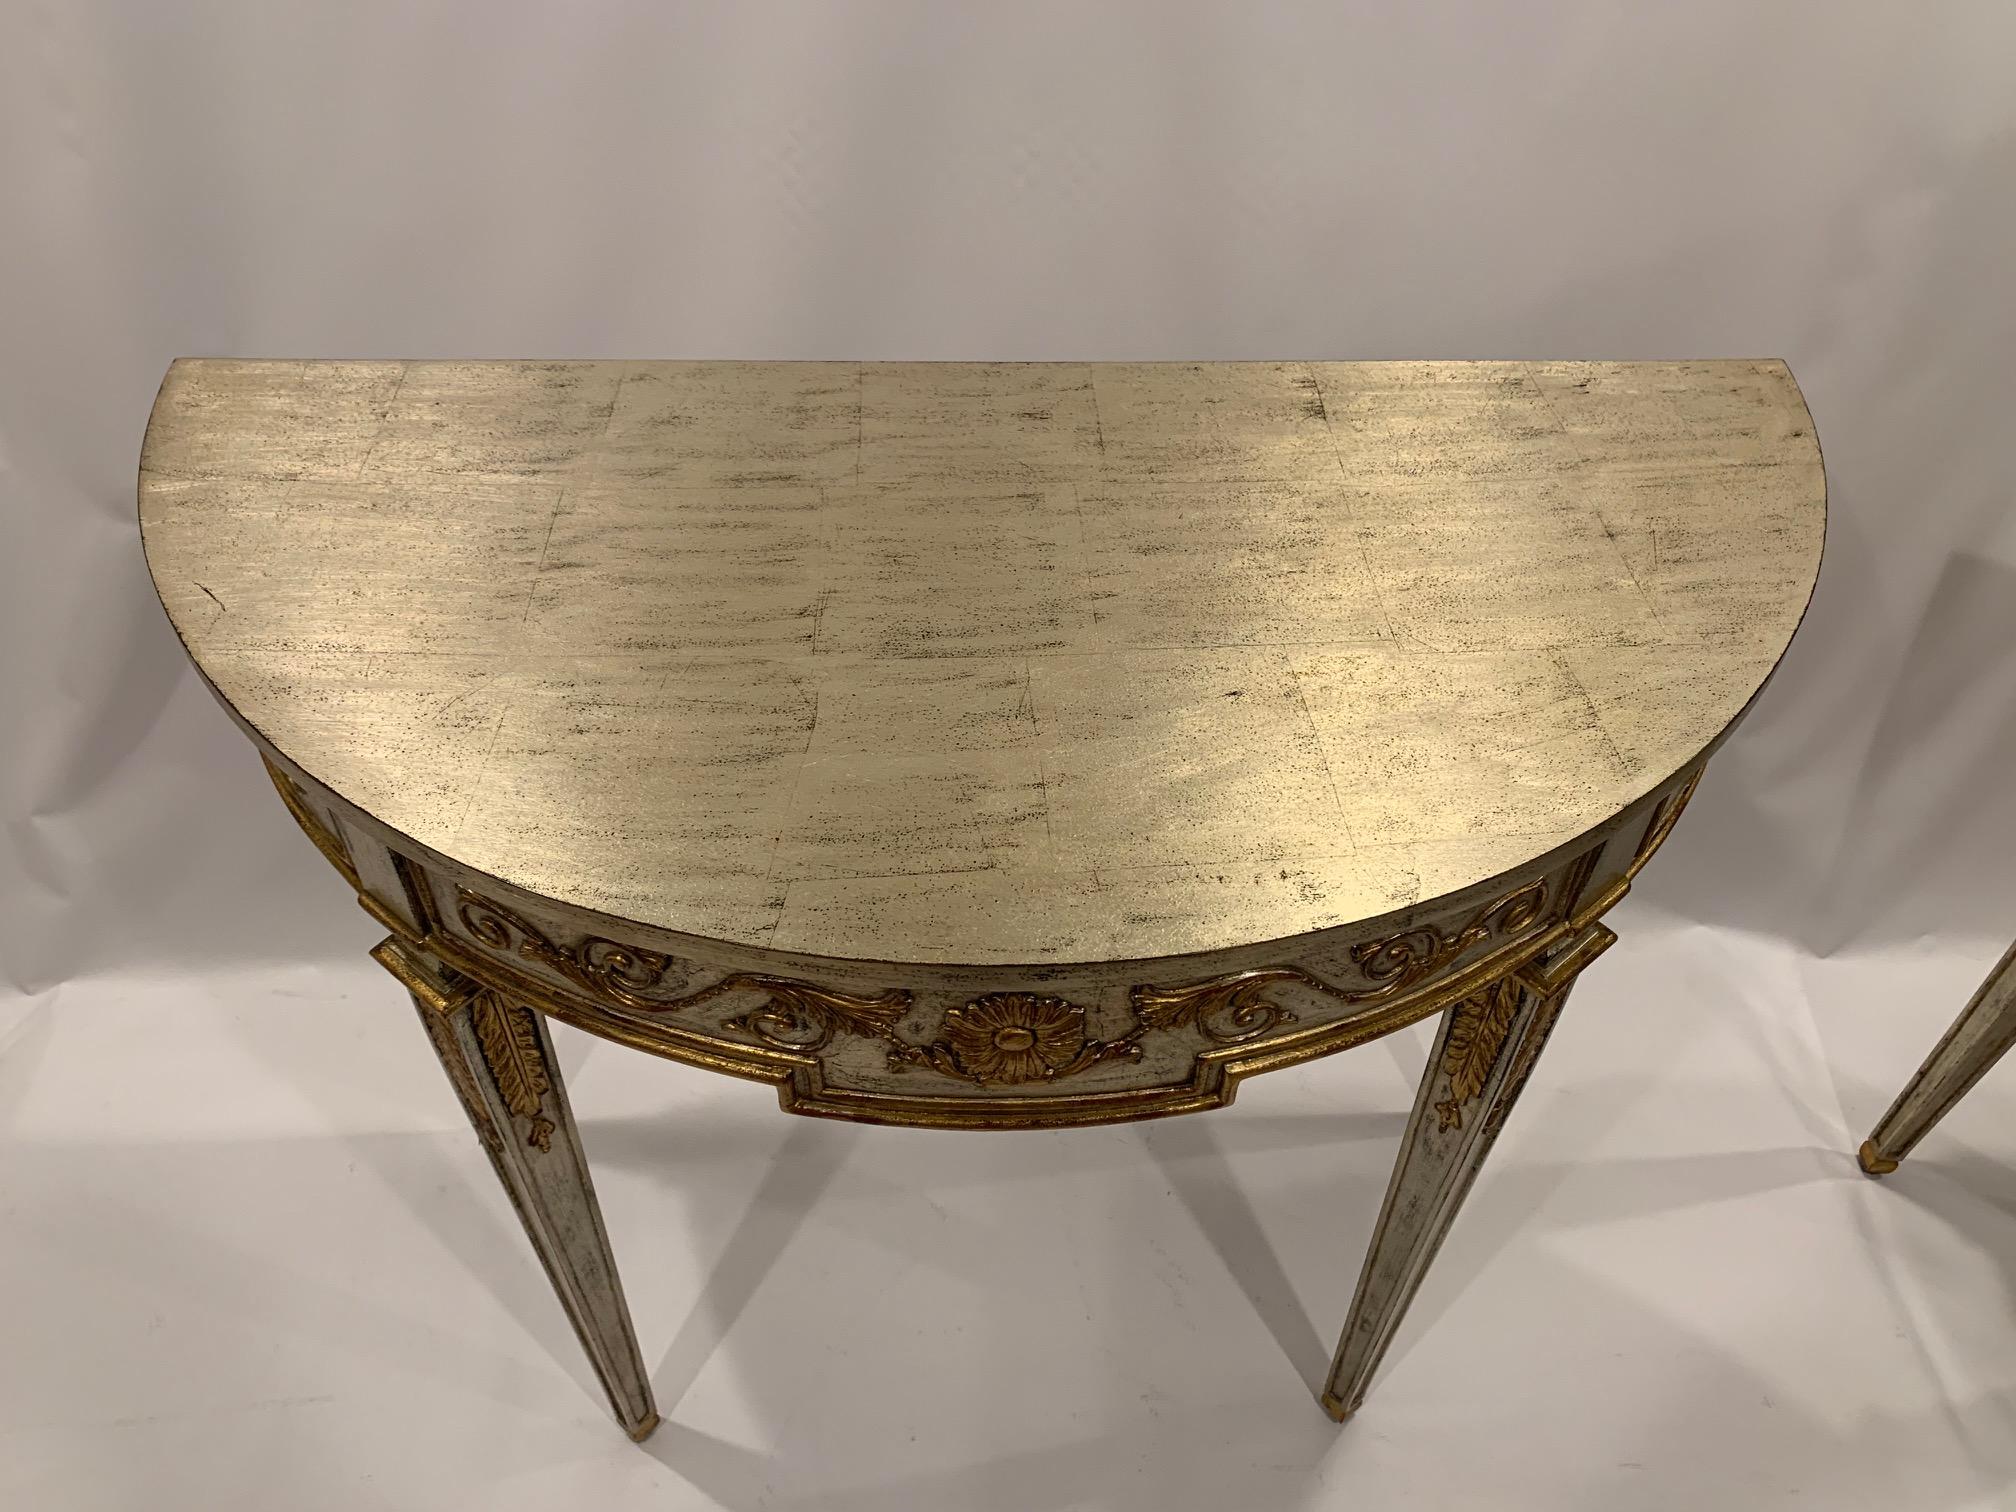 Painted Glamorous Pair of Silver & Gold Leaf Demilune Console Tables